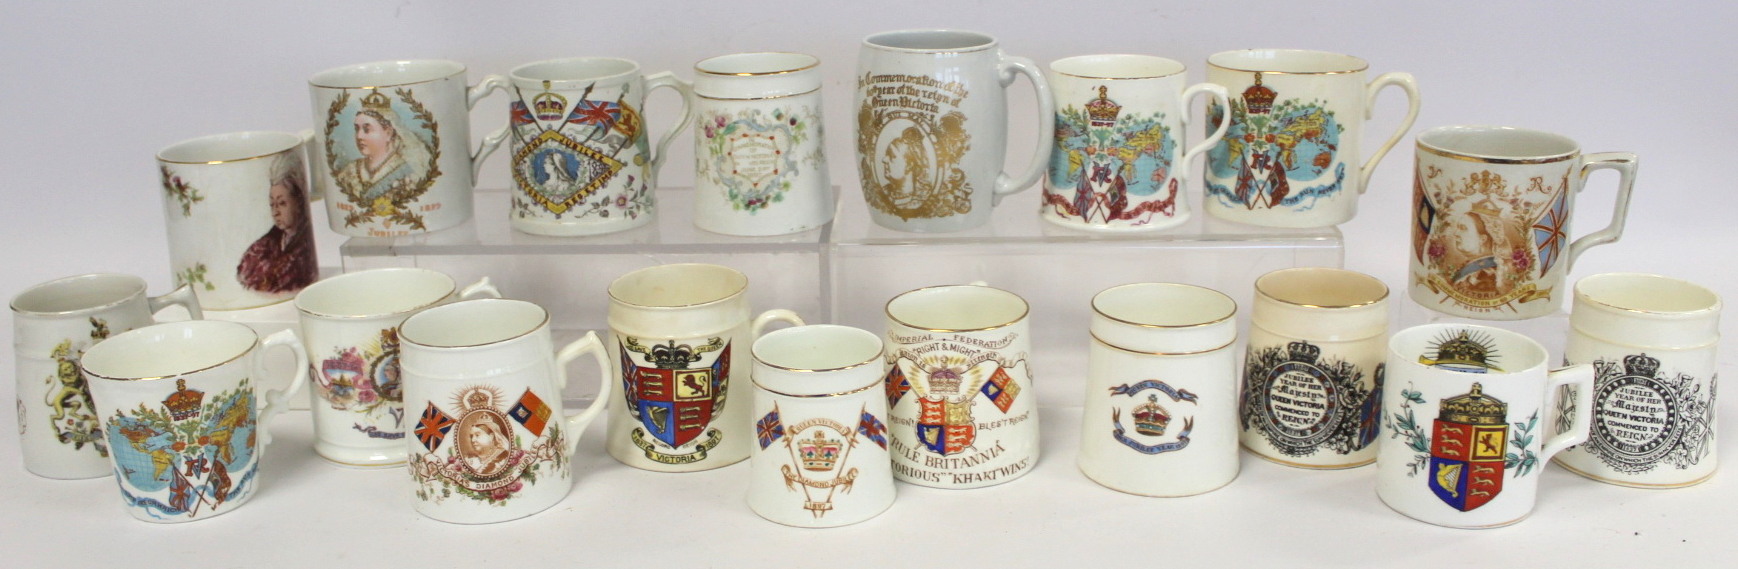 Collection of eighteen commemorative mugs for the Jubilees of Queen Victoria 1887 and 1897; also